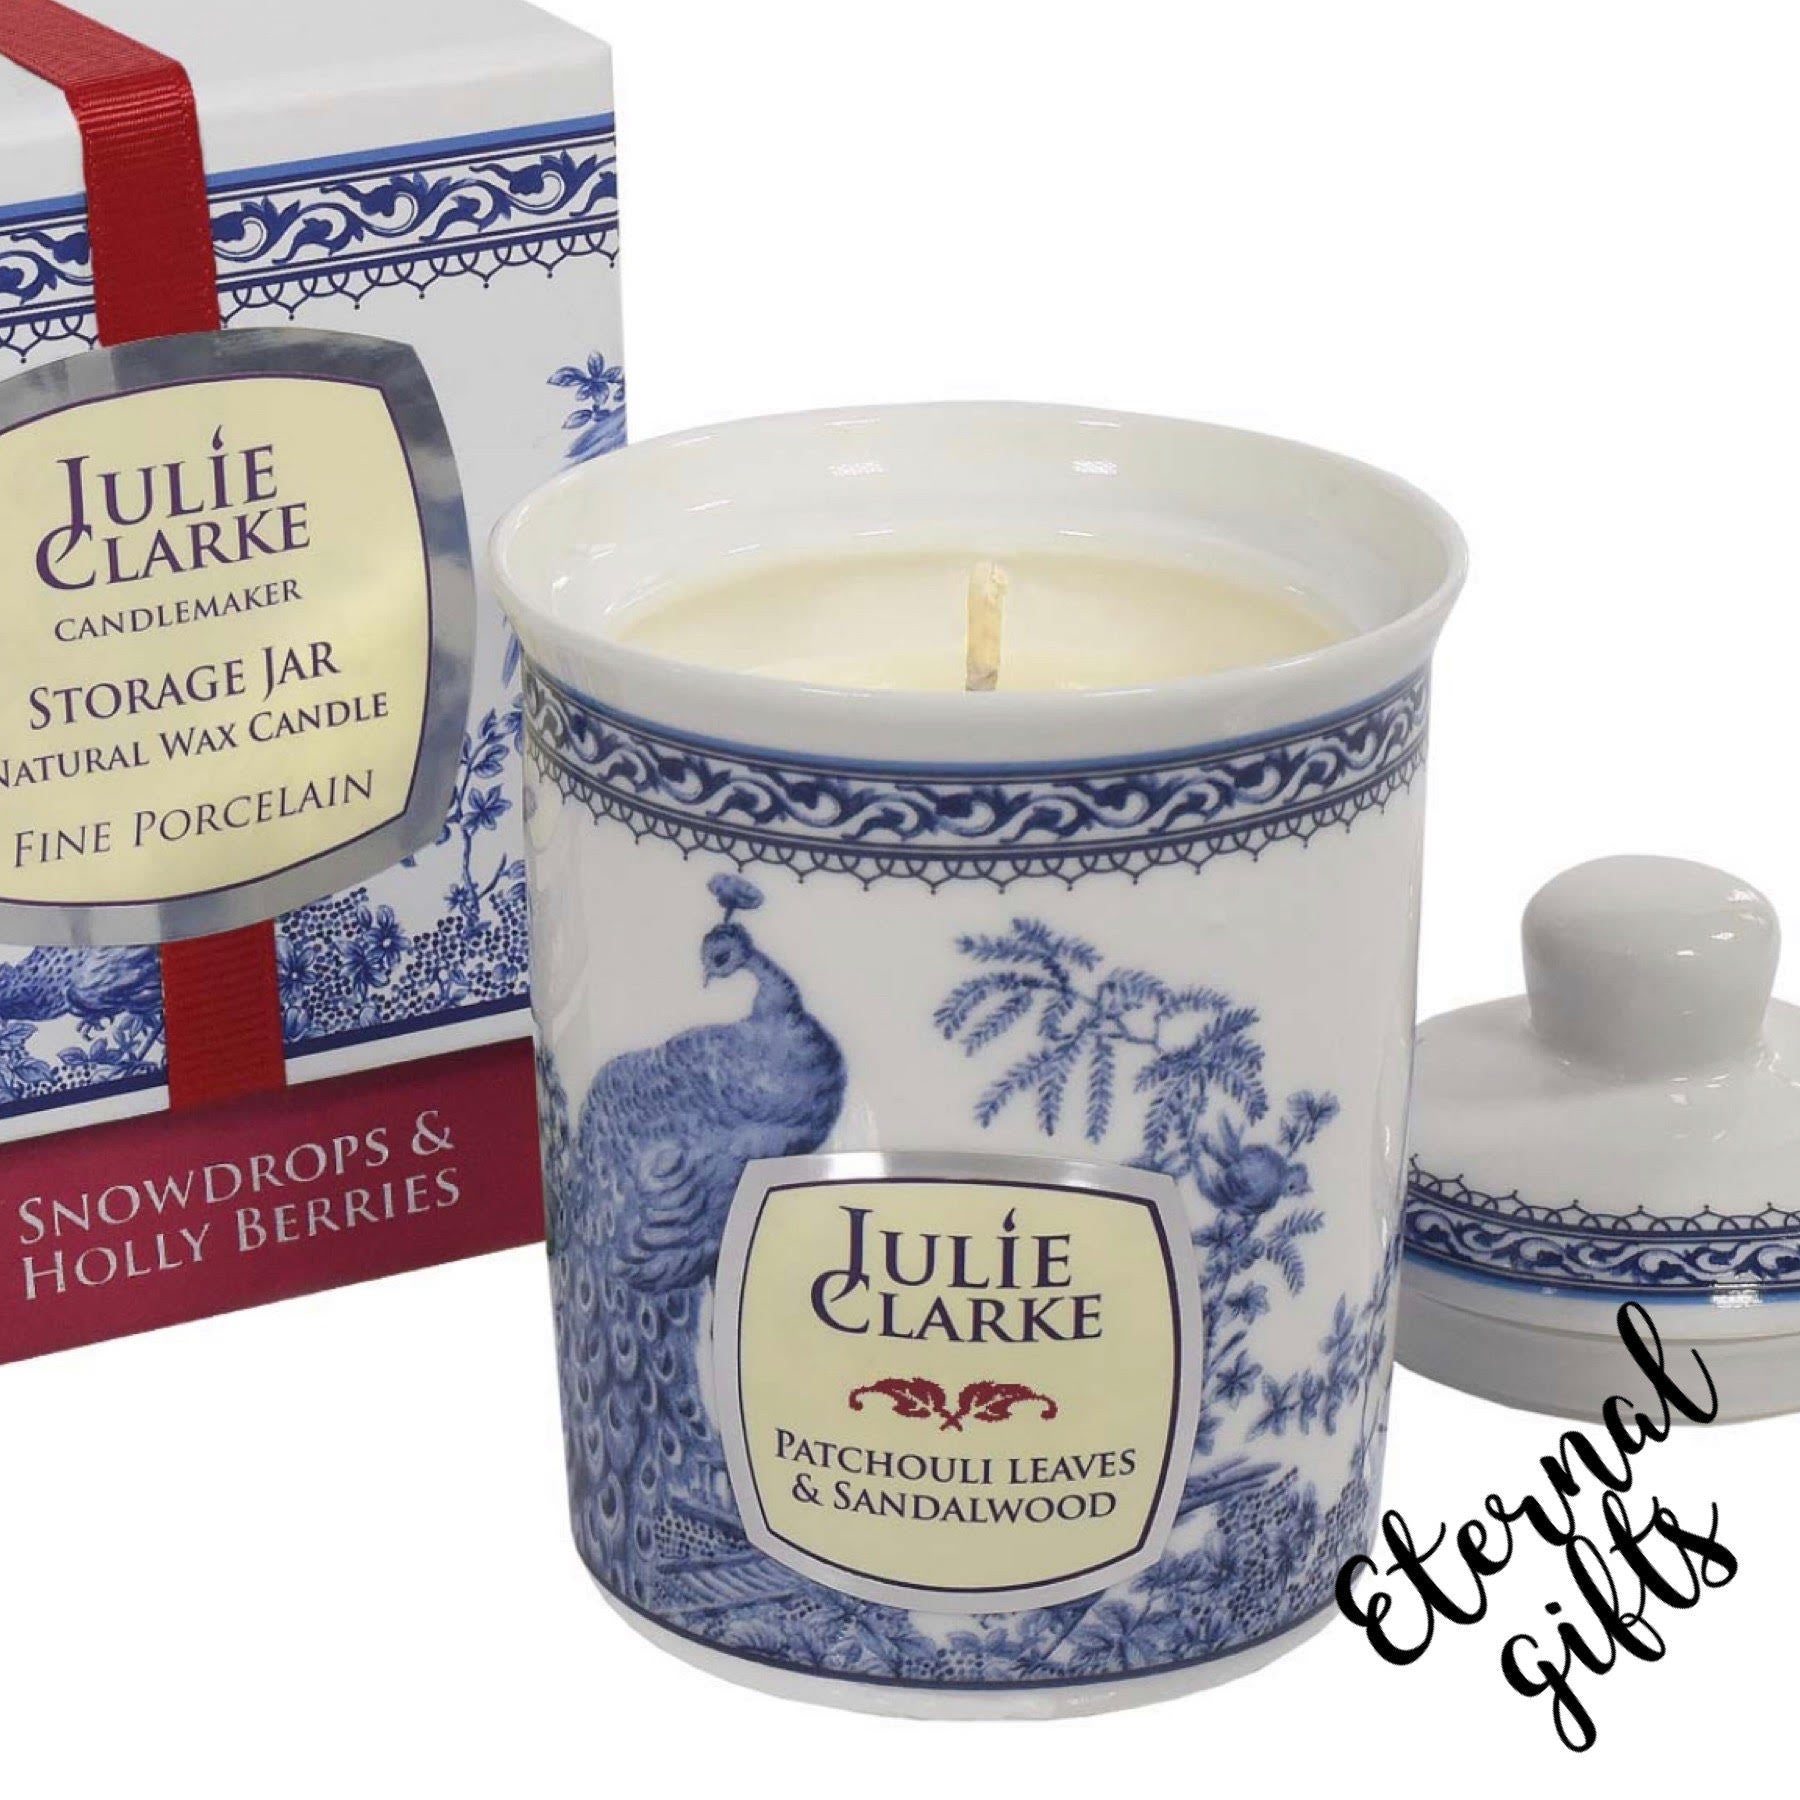 Snowdrops & Holly Berries Candle Peacock Range by Julie Clarke